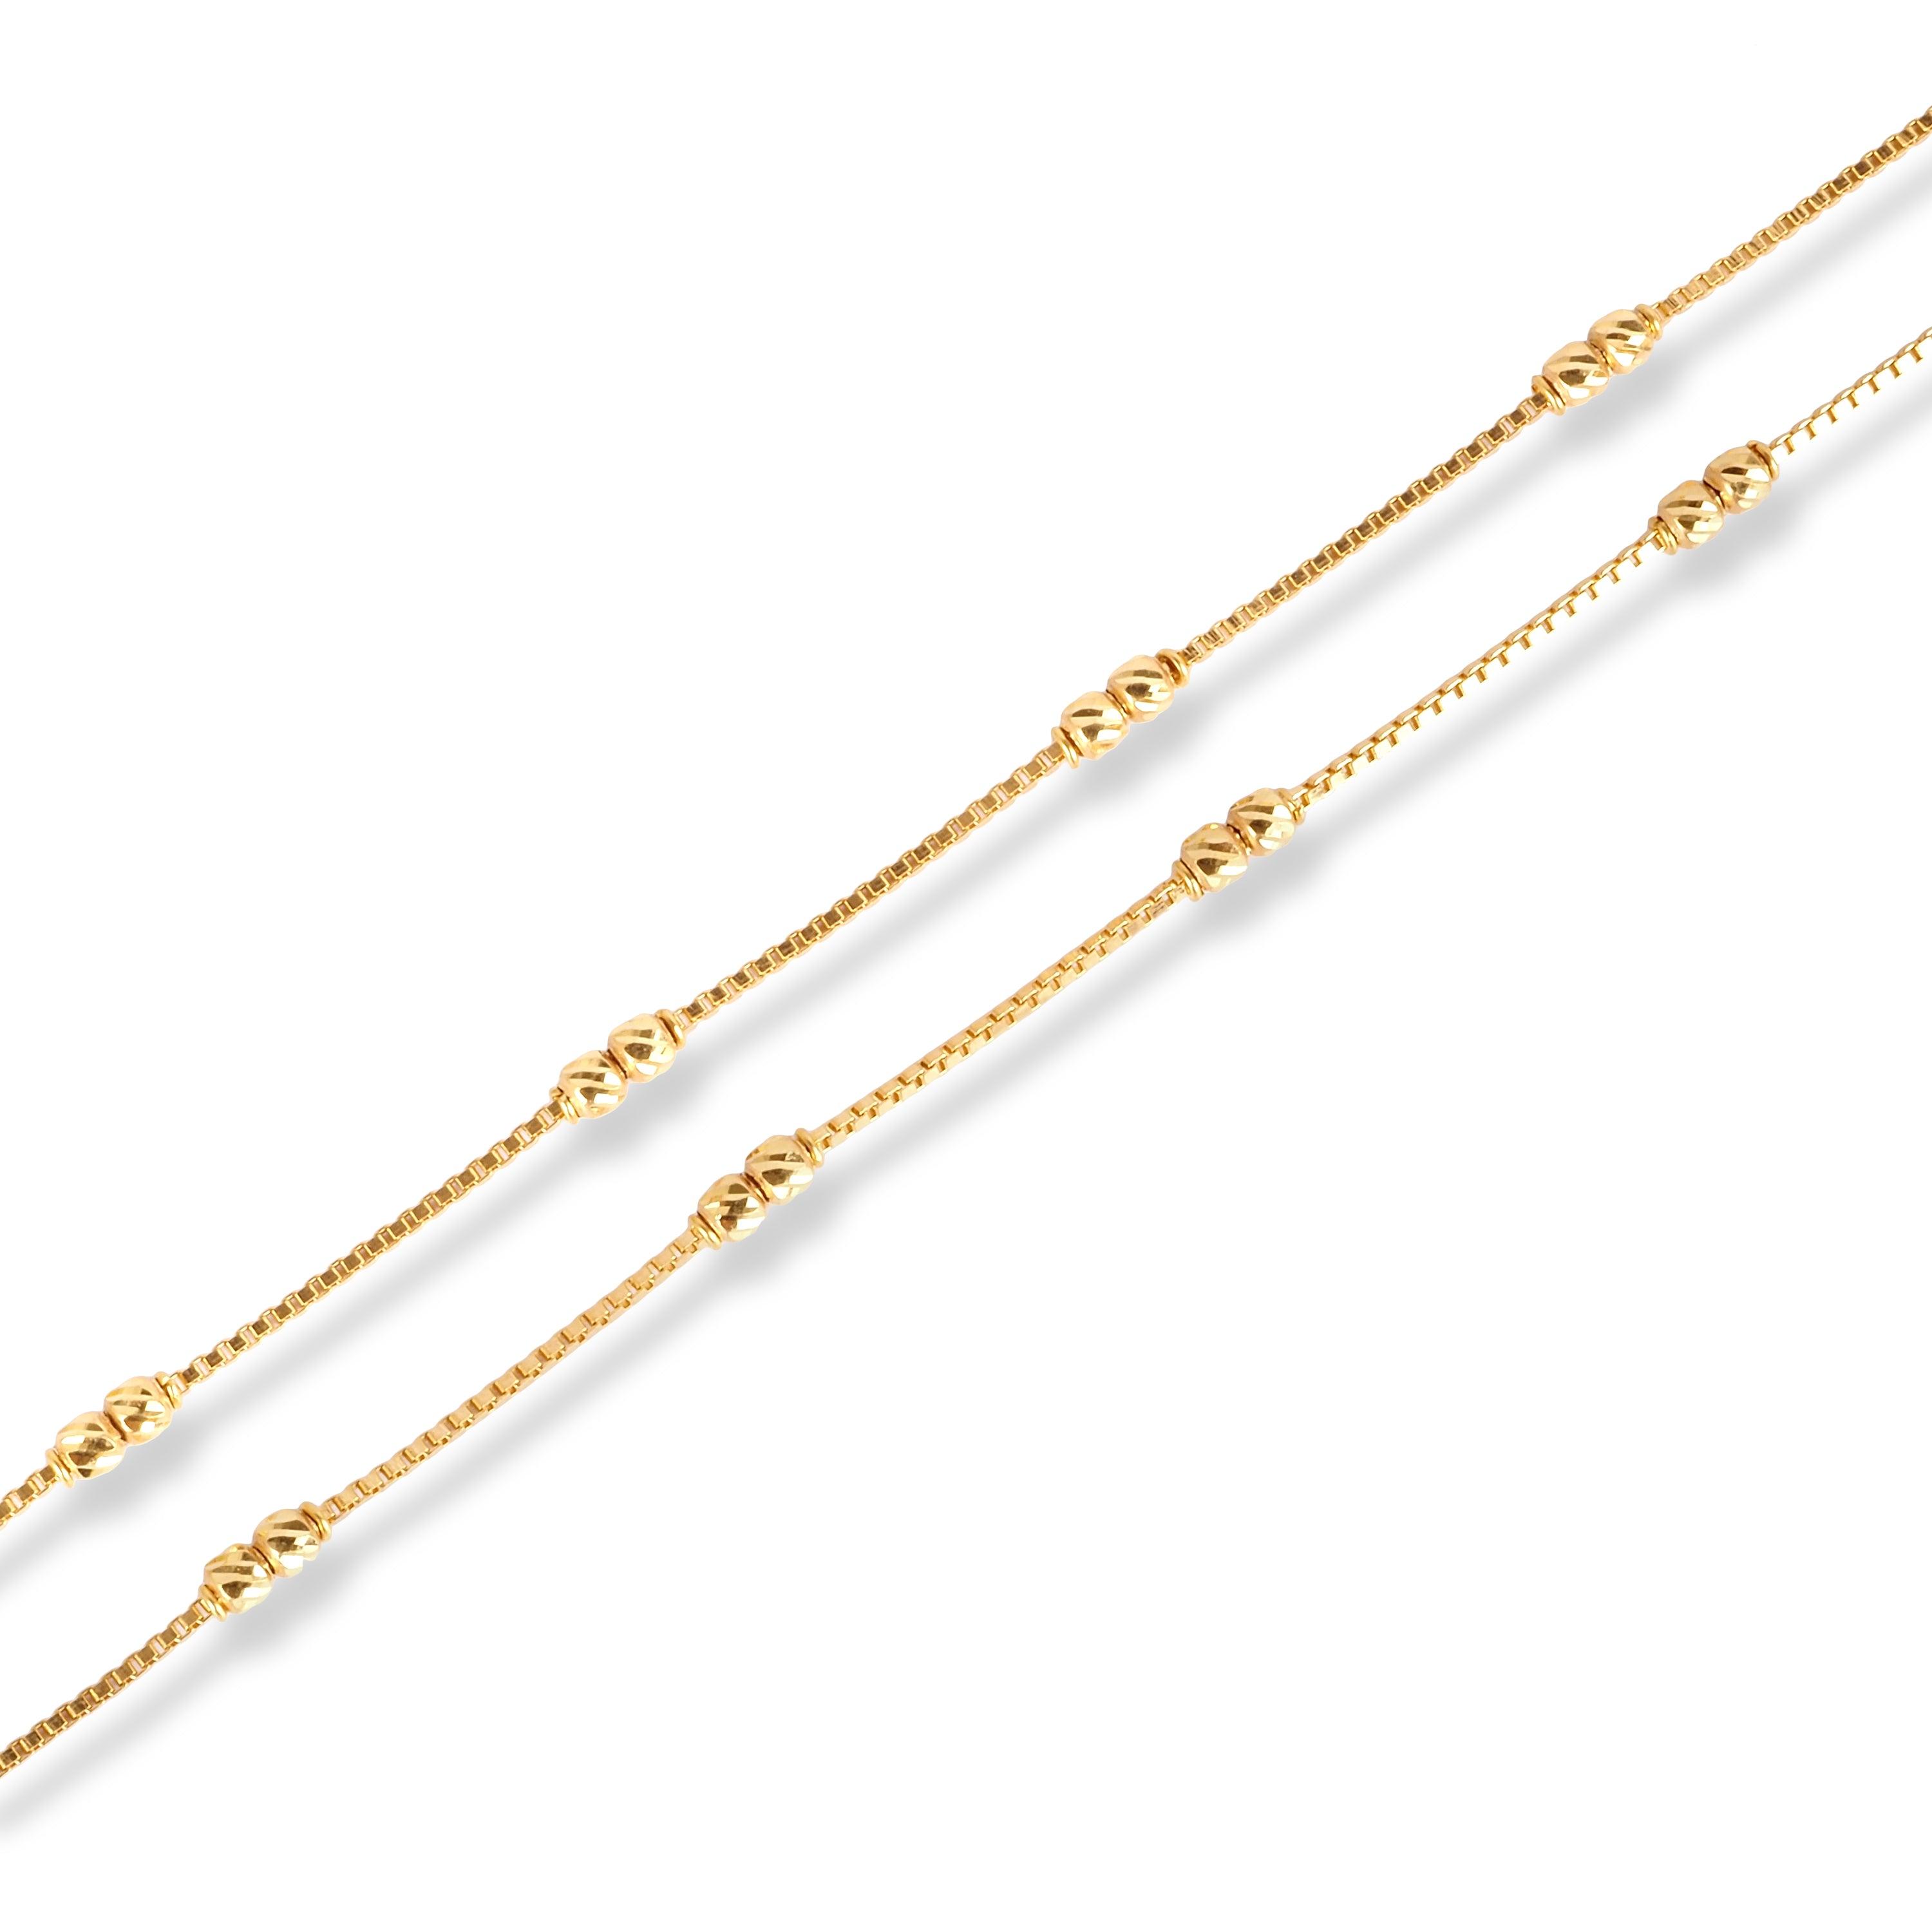 Pair of 22ct Gold Anklet in Diamond Cutting Beads with Ghughri Charm with '' S '' Clasp A-8269 - Minar Jewellers